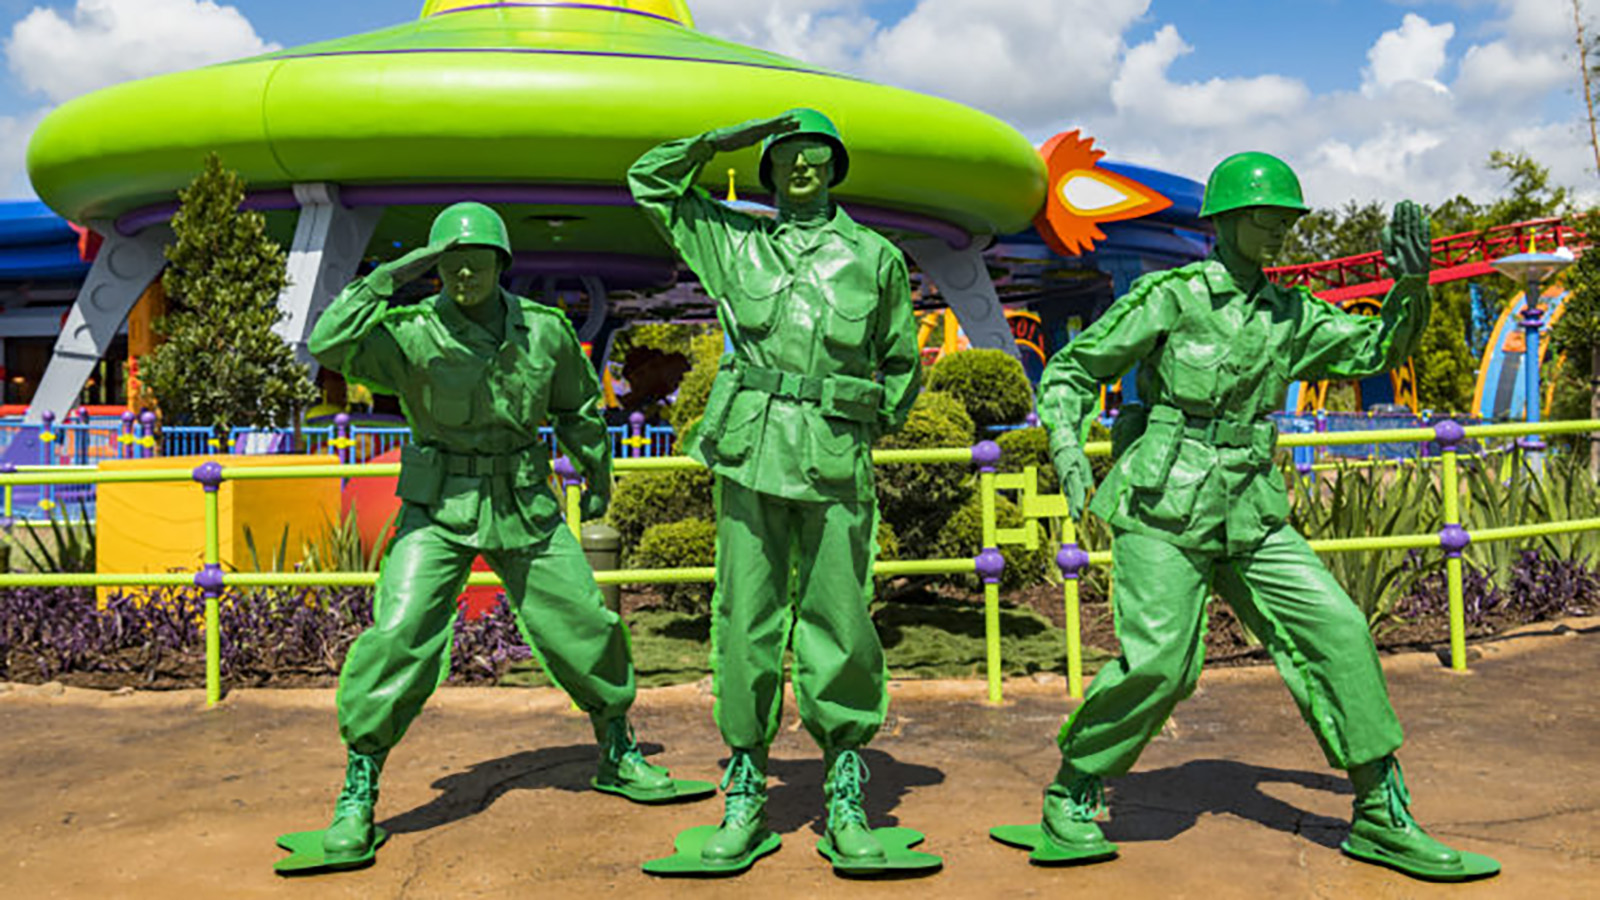 Green-Army-Man-Characters-from-Disney-Movies-in-Parks